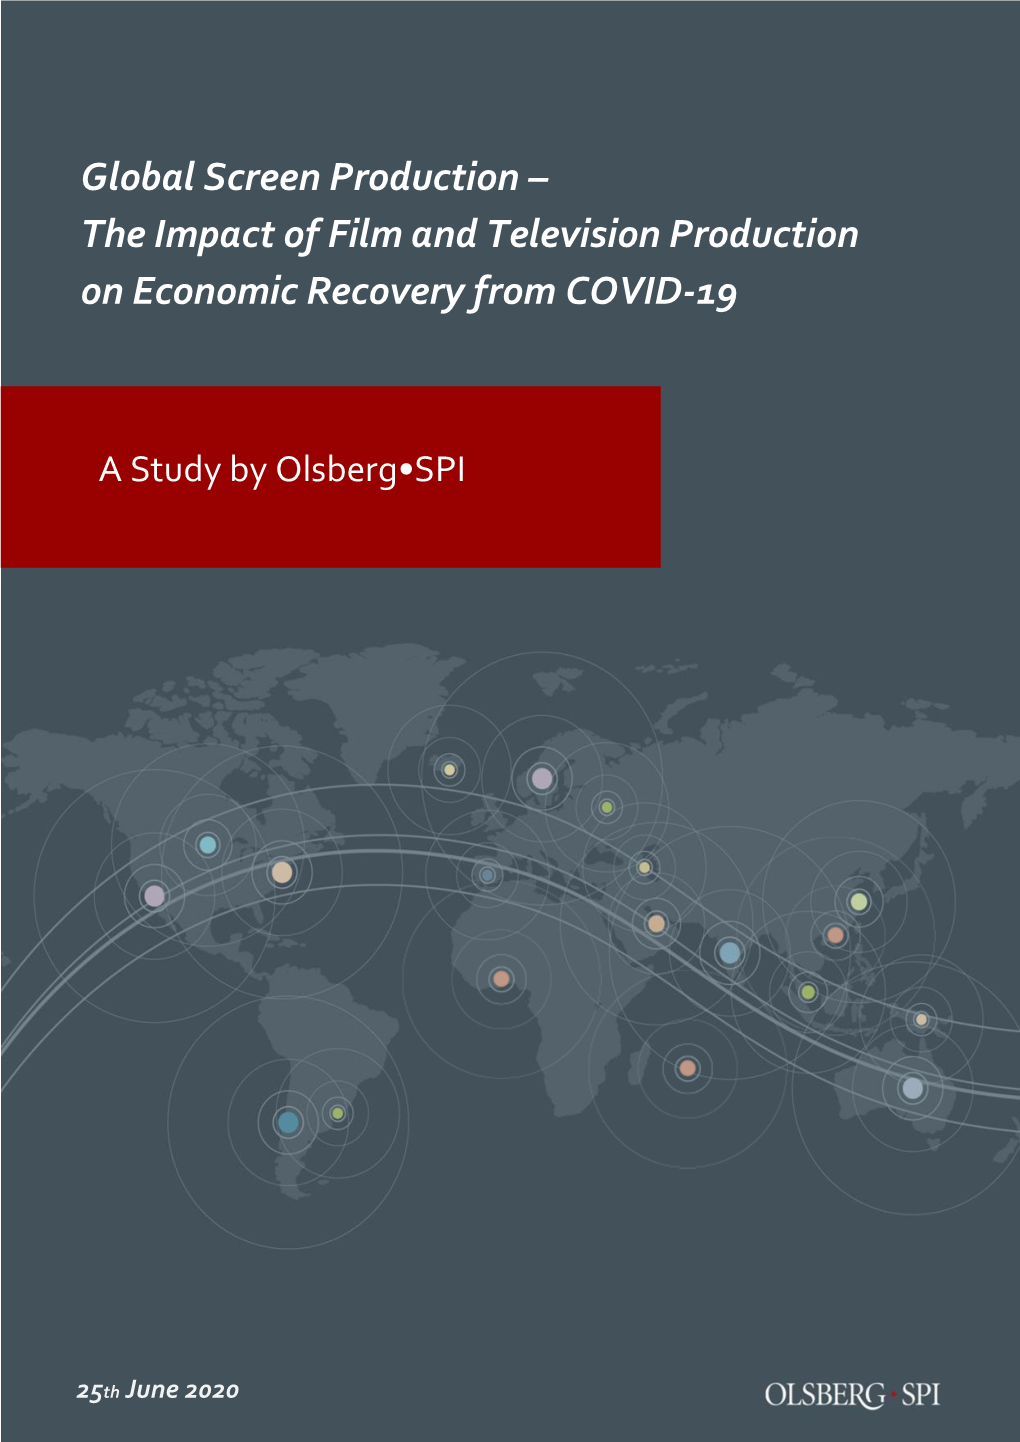 The Impact of Film and Television Production on Economic Recovery from COVID-19